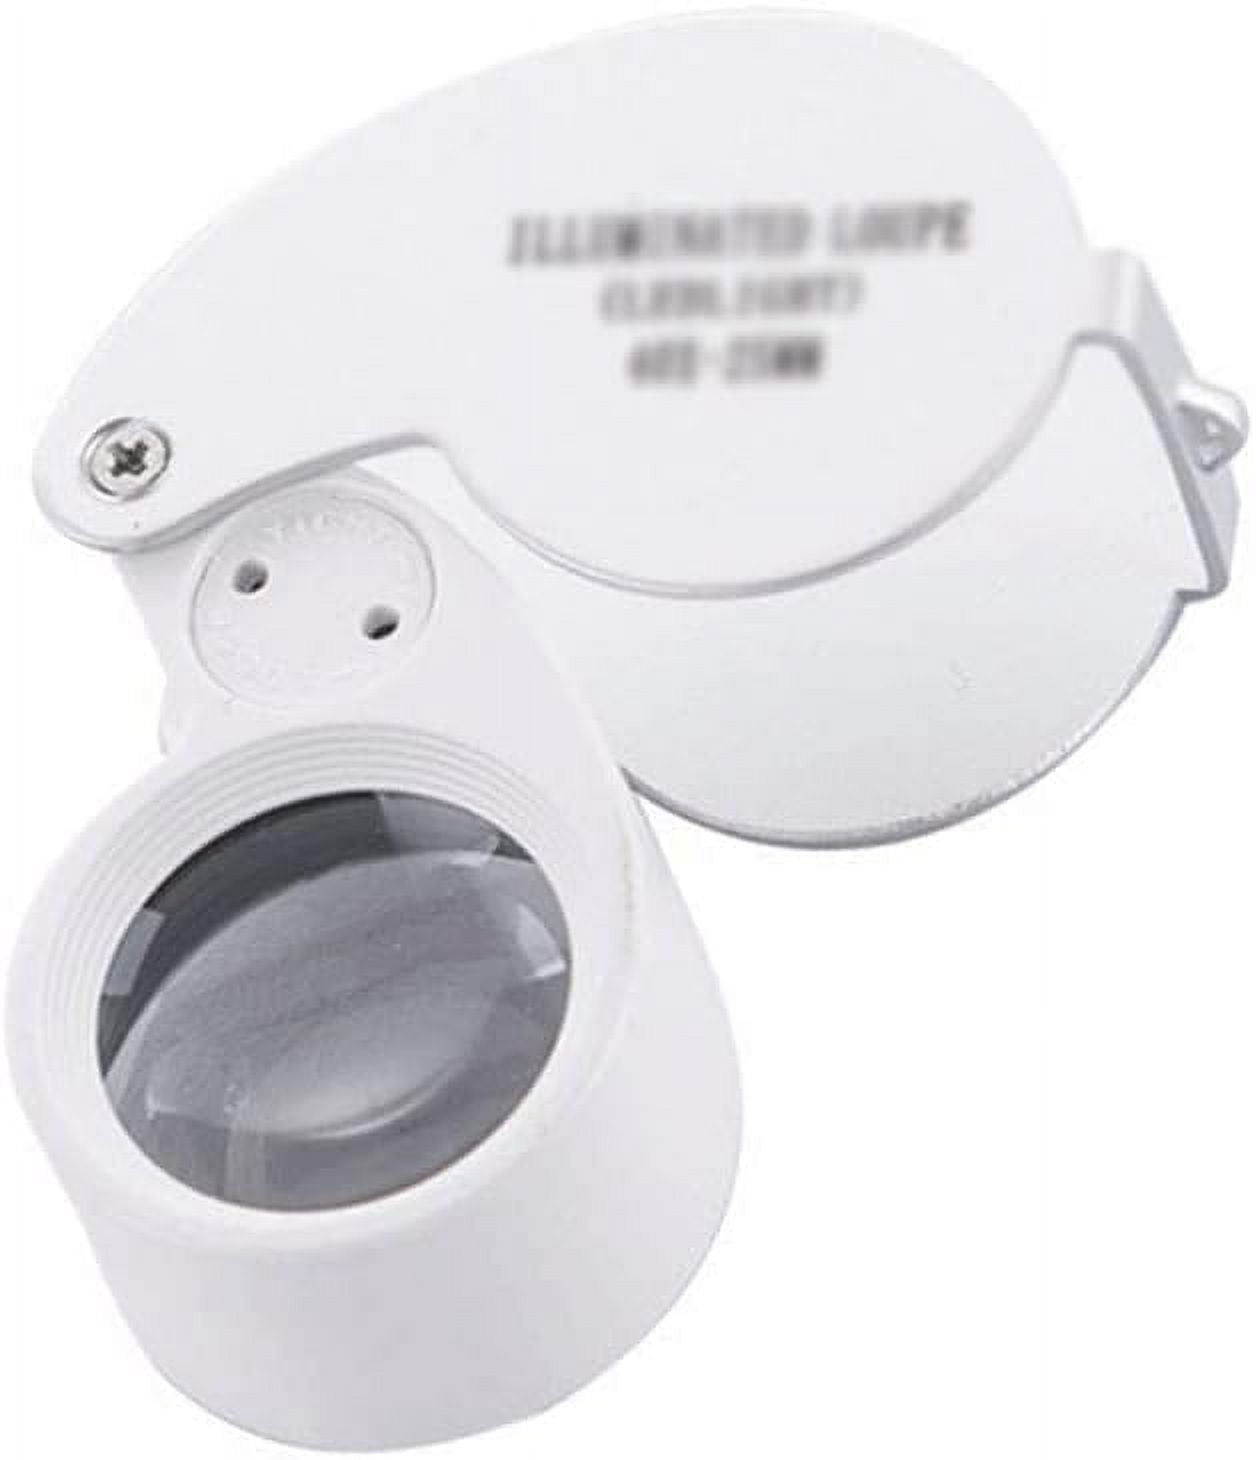 LED Illuminated jewelry Magnifiers Loop